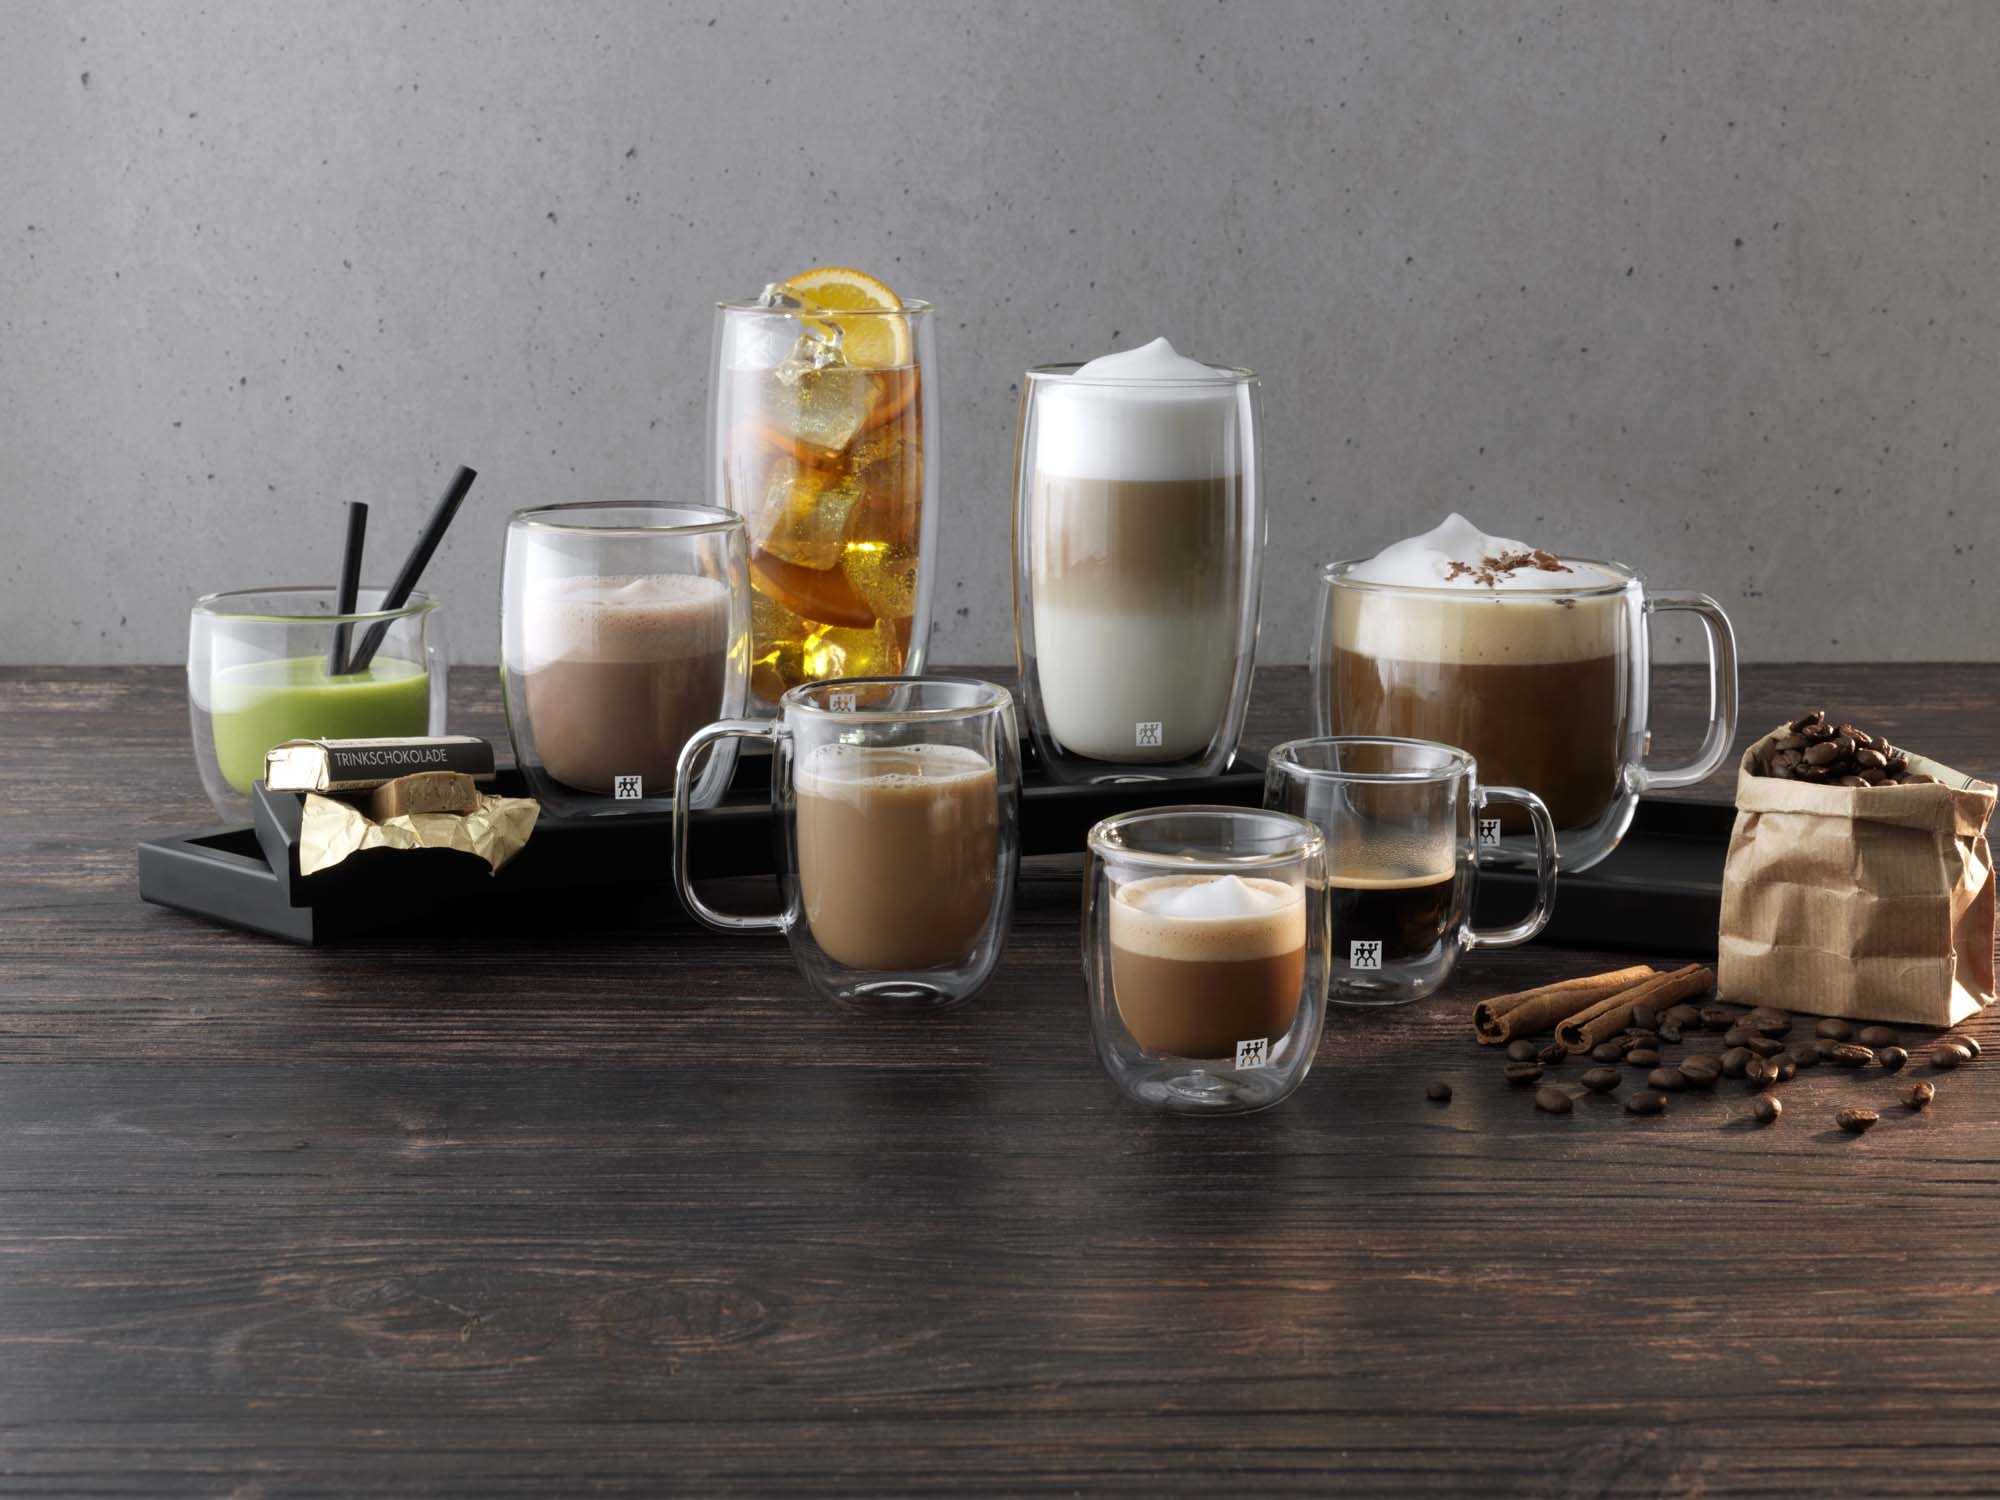 Zwilling ZWILLING Sorrento 2-pc Double-wall Glass Latte Cup Set